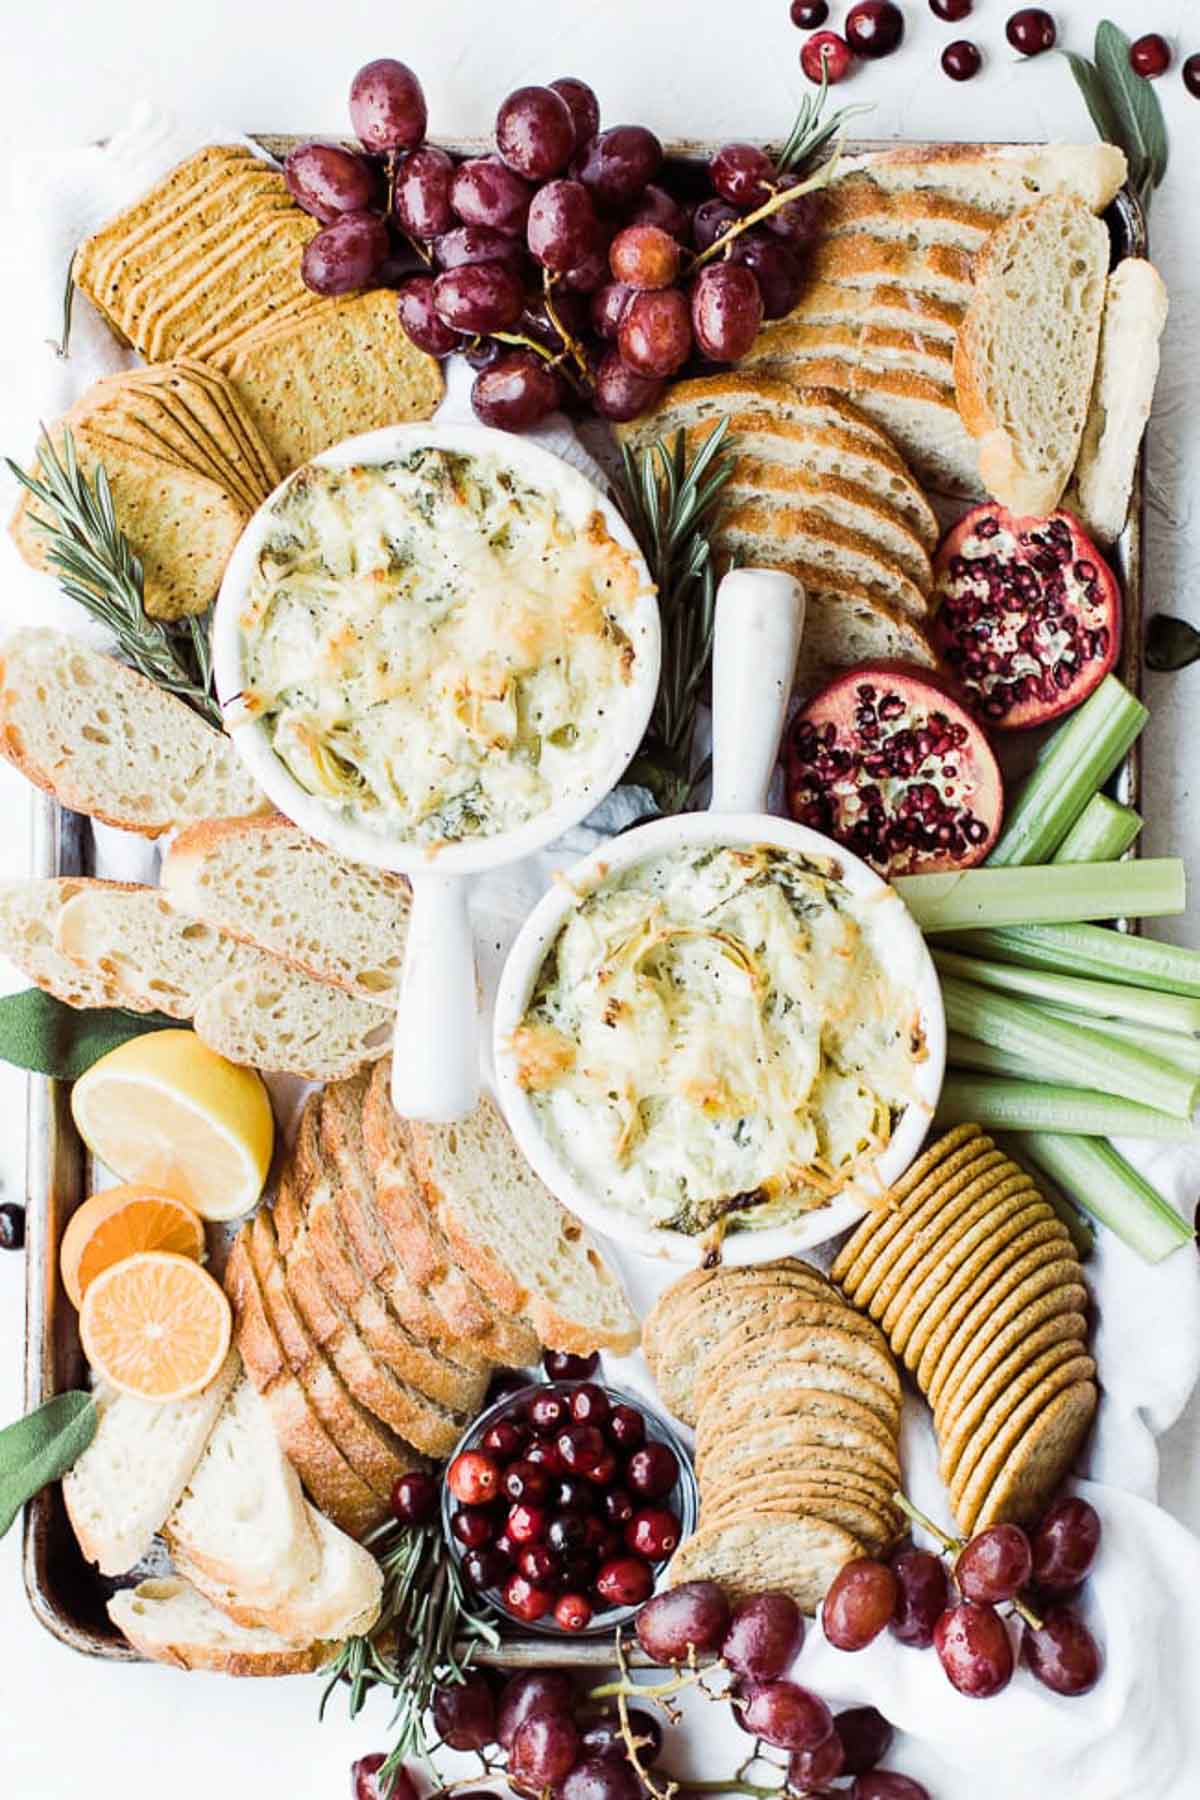 Two bowls of spinach artichoke dip with bread, crackers around them.